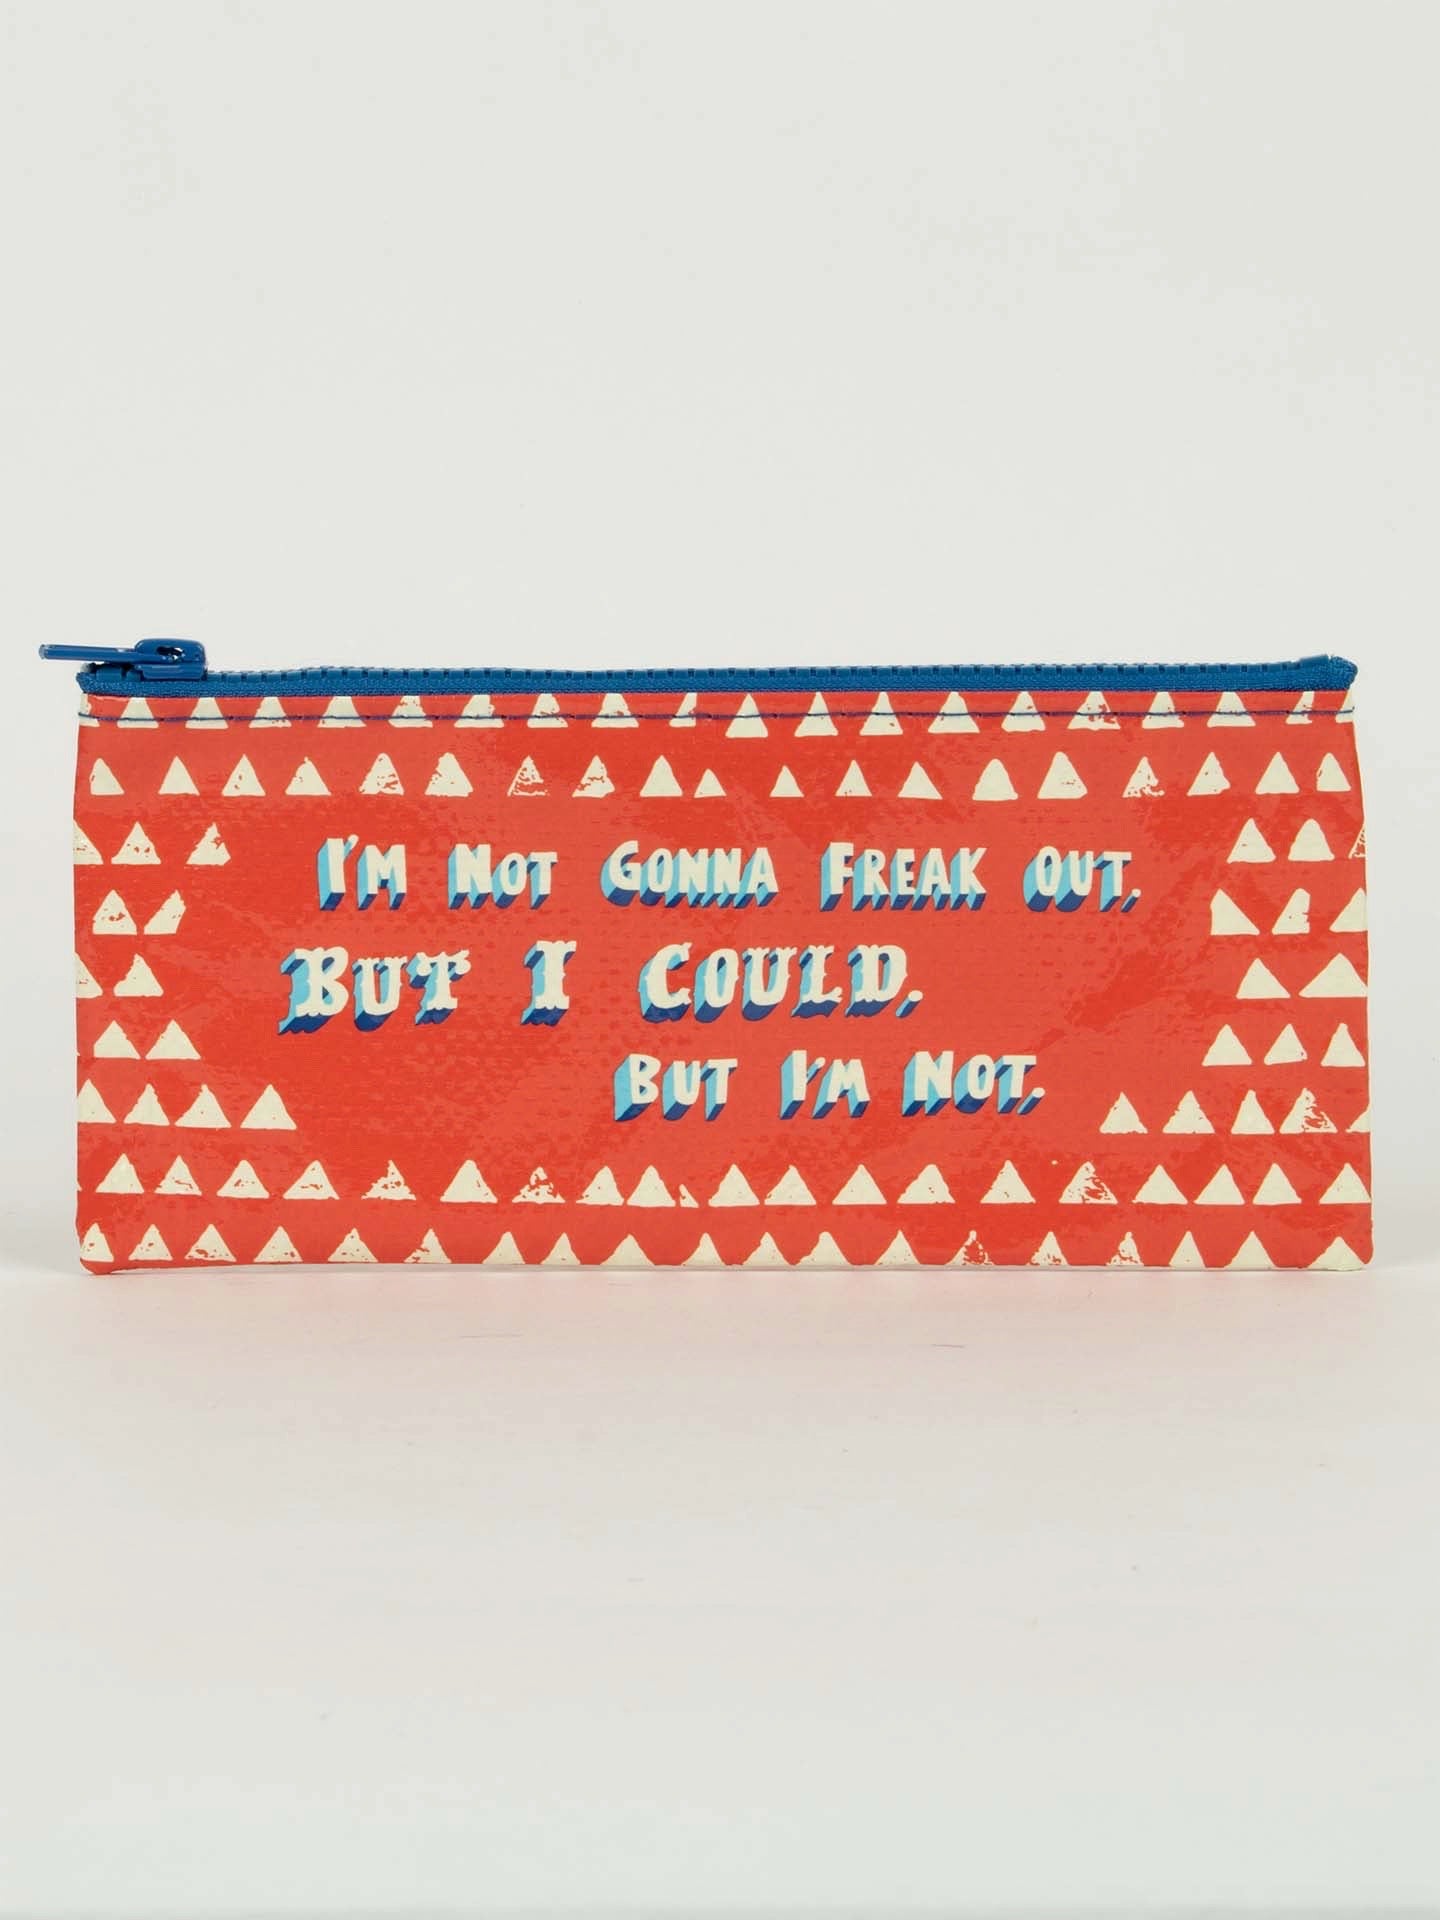 Blue Q Pencil Case - I'm Not Gonna Freak Out. But I Could, But I'm Not.    